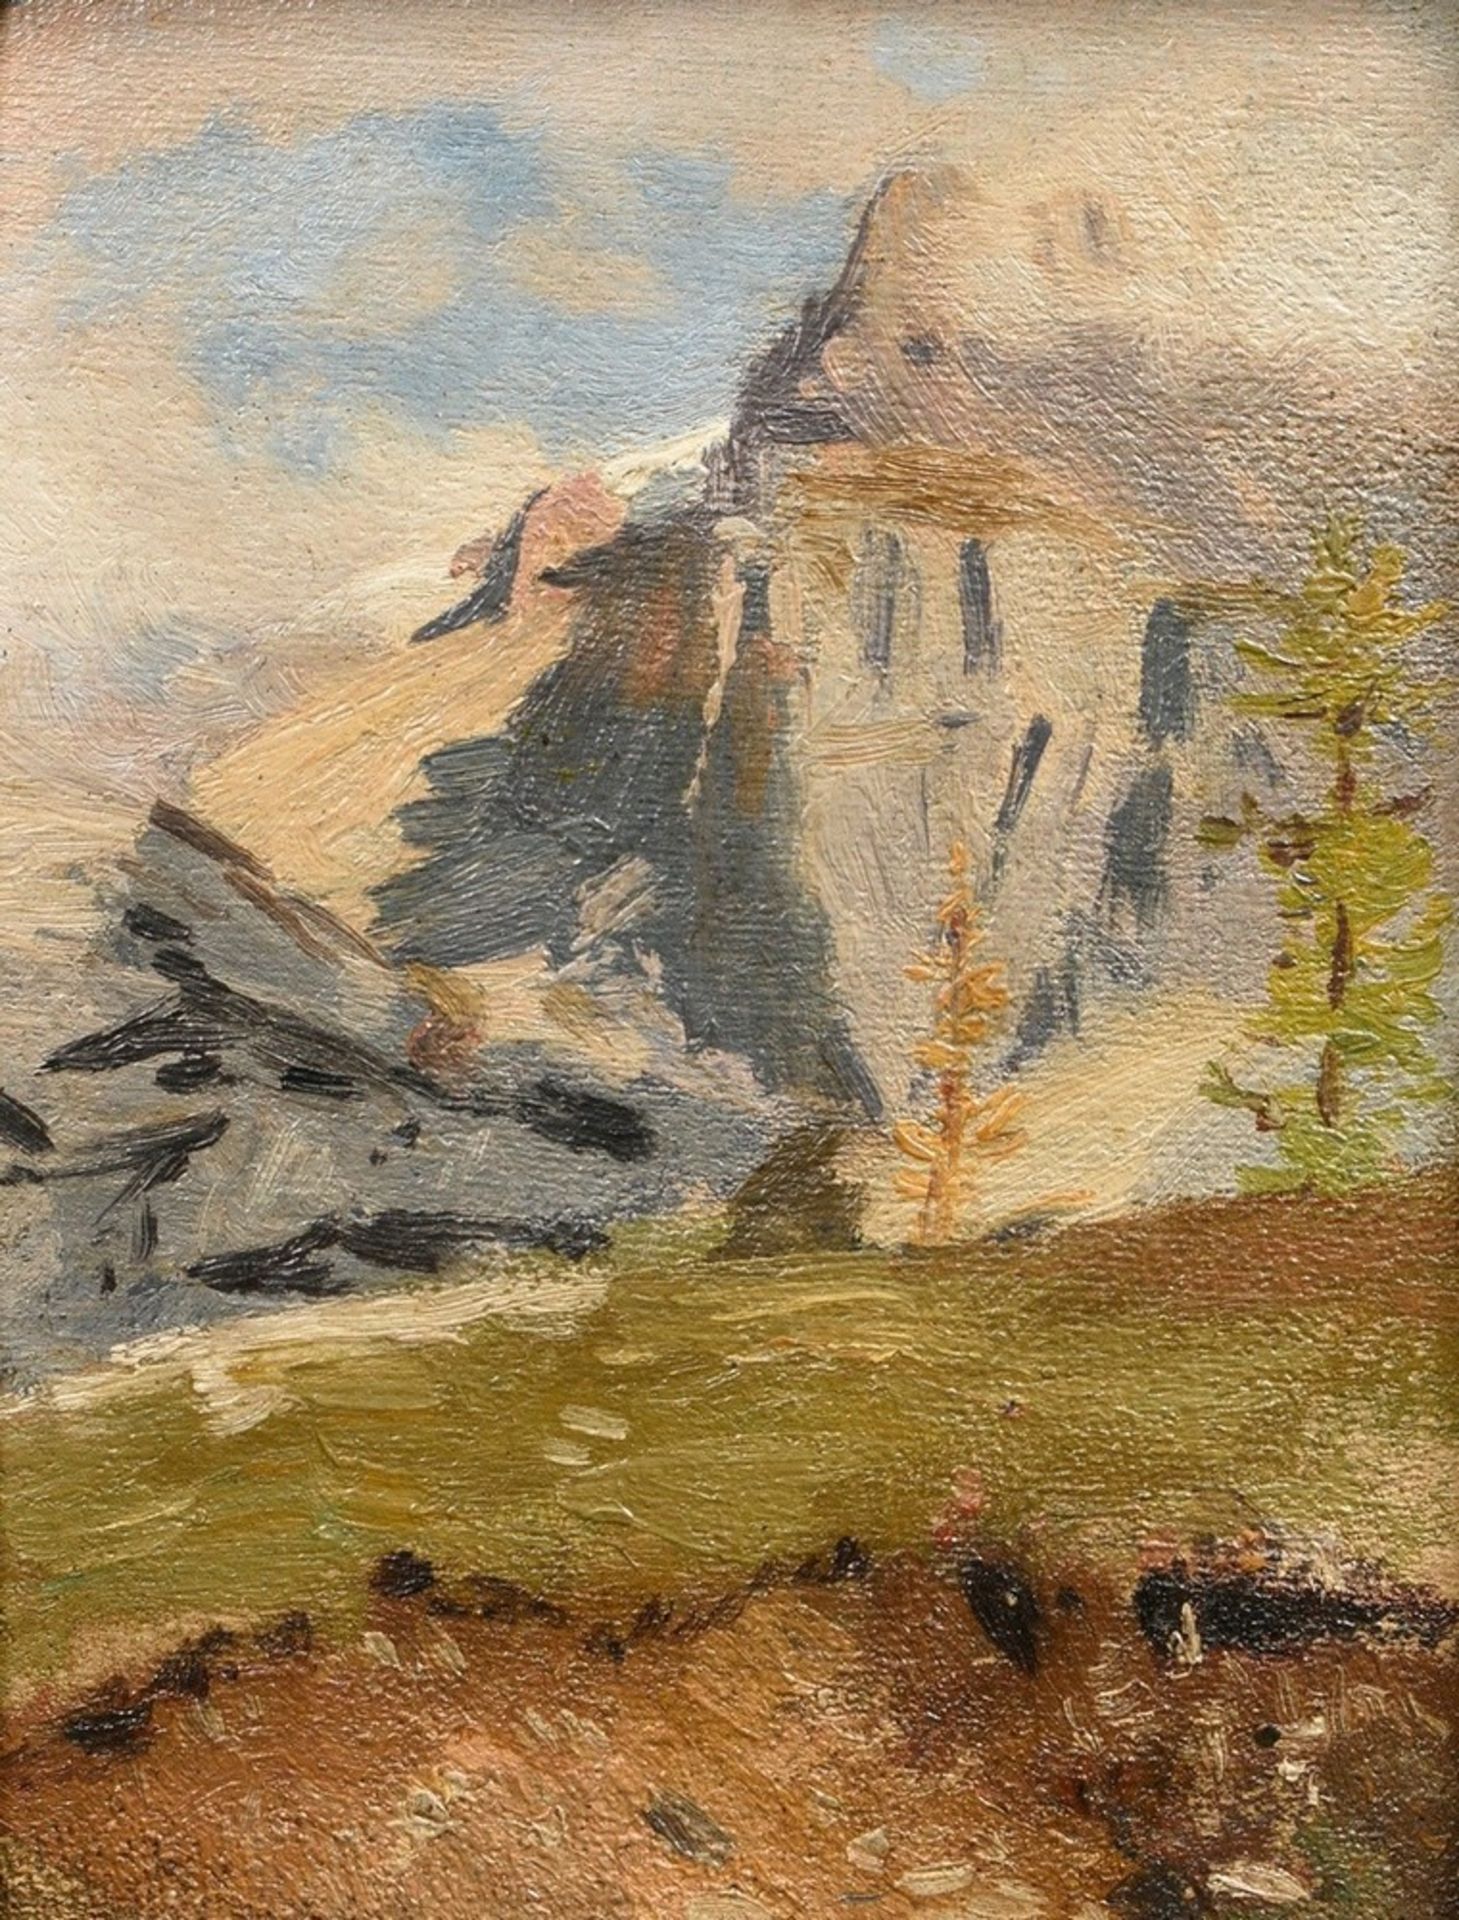 Unknown artist c. 1900 "Matterhorn", oil/canvas mounted on cardboard, stepped, gilded frame, 16.5x1